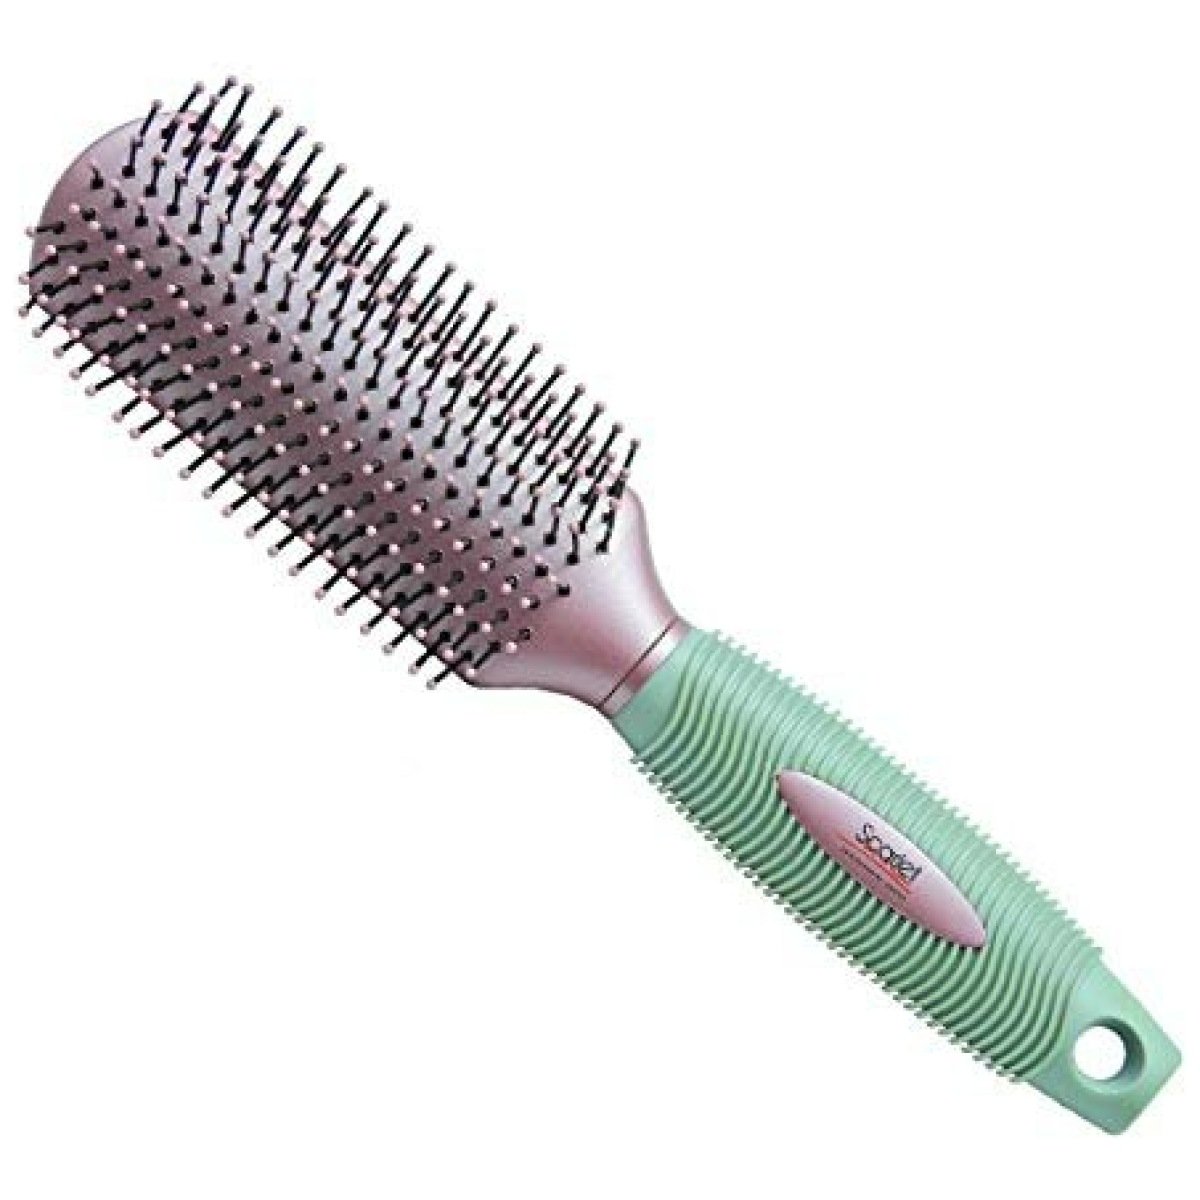 Scarlet Line Professional 9 Rows Medium Styling Flat Hair Brush With Rubber Handle For Men & Women